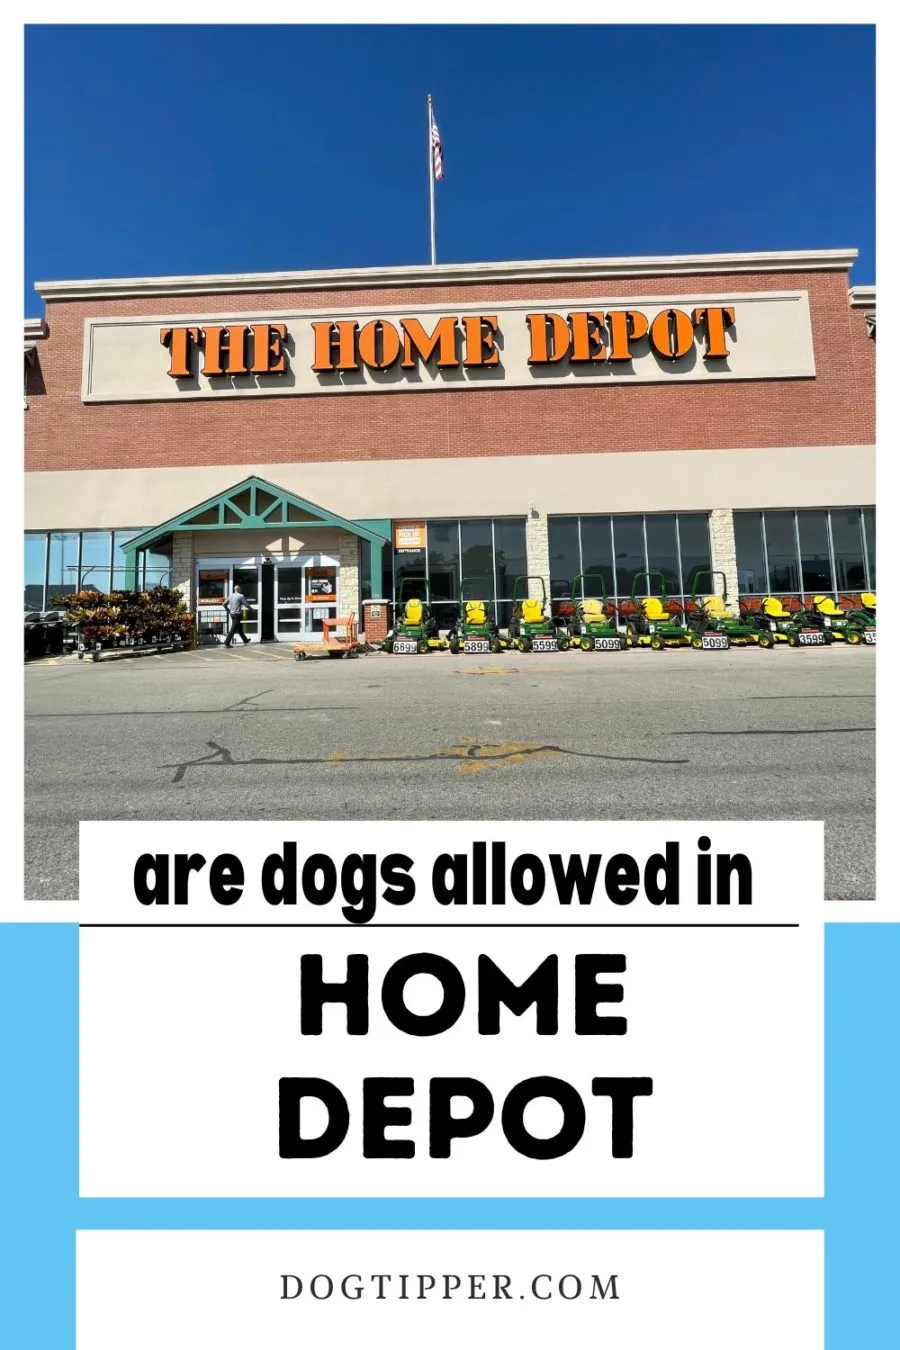 Can I Bring My Dog in Home Depot?